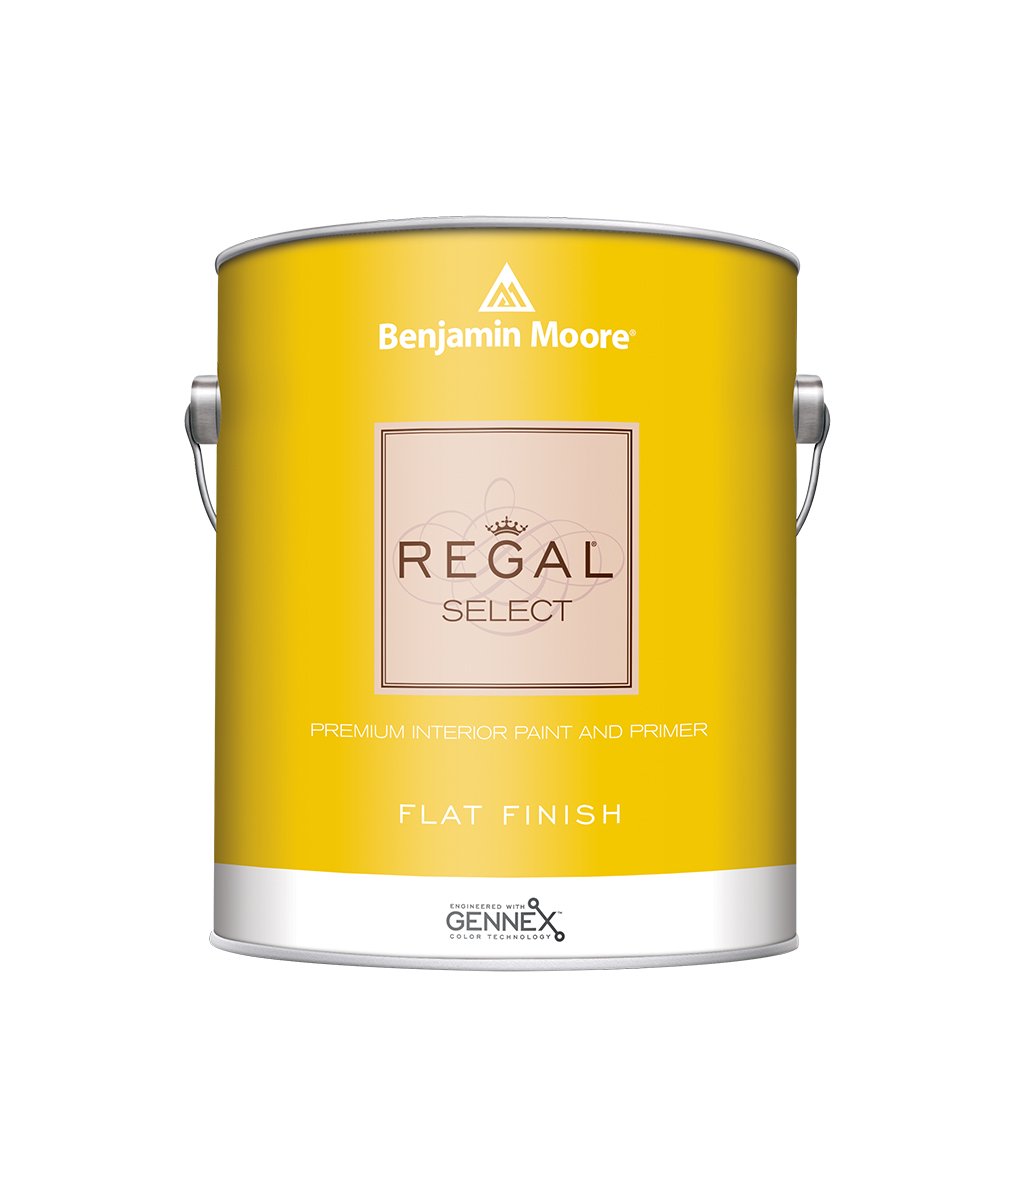 Benjamin Moore Regal Select Eggshell Paint available at JC Licht.